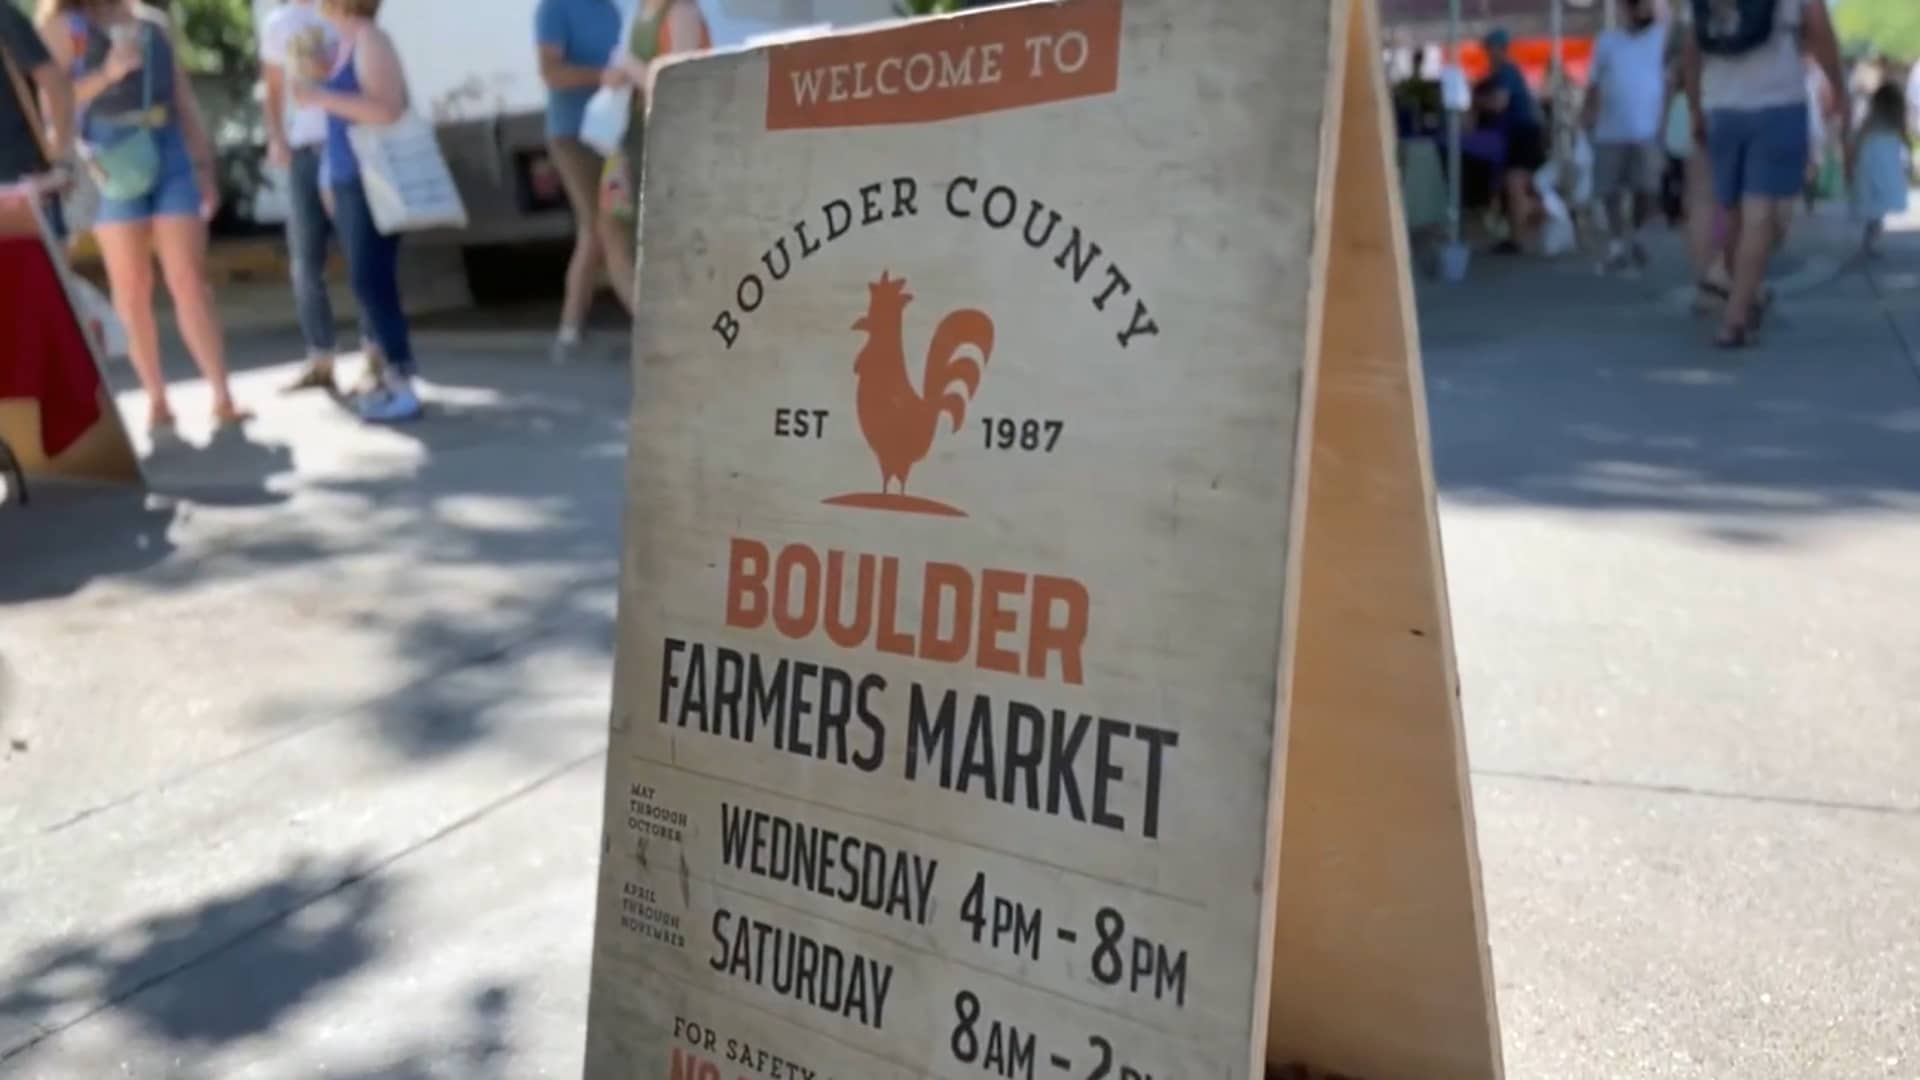 A sign from the Boulder Farmers Market, operating from April to November, serving as an incubator for numerous small food businesses.